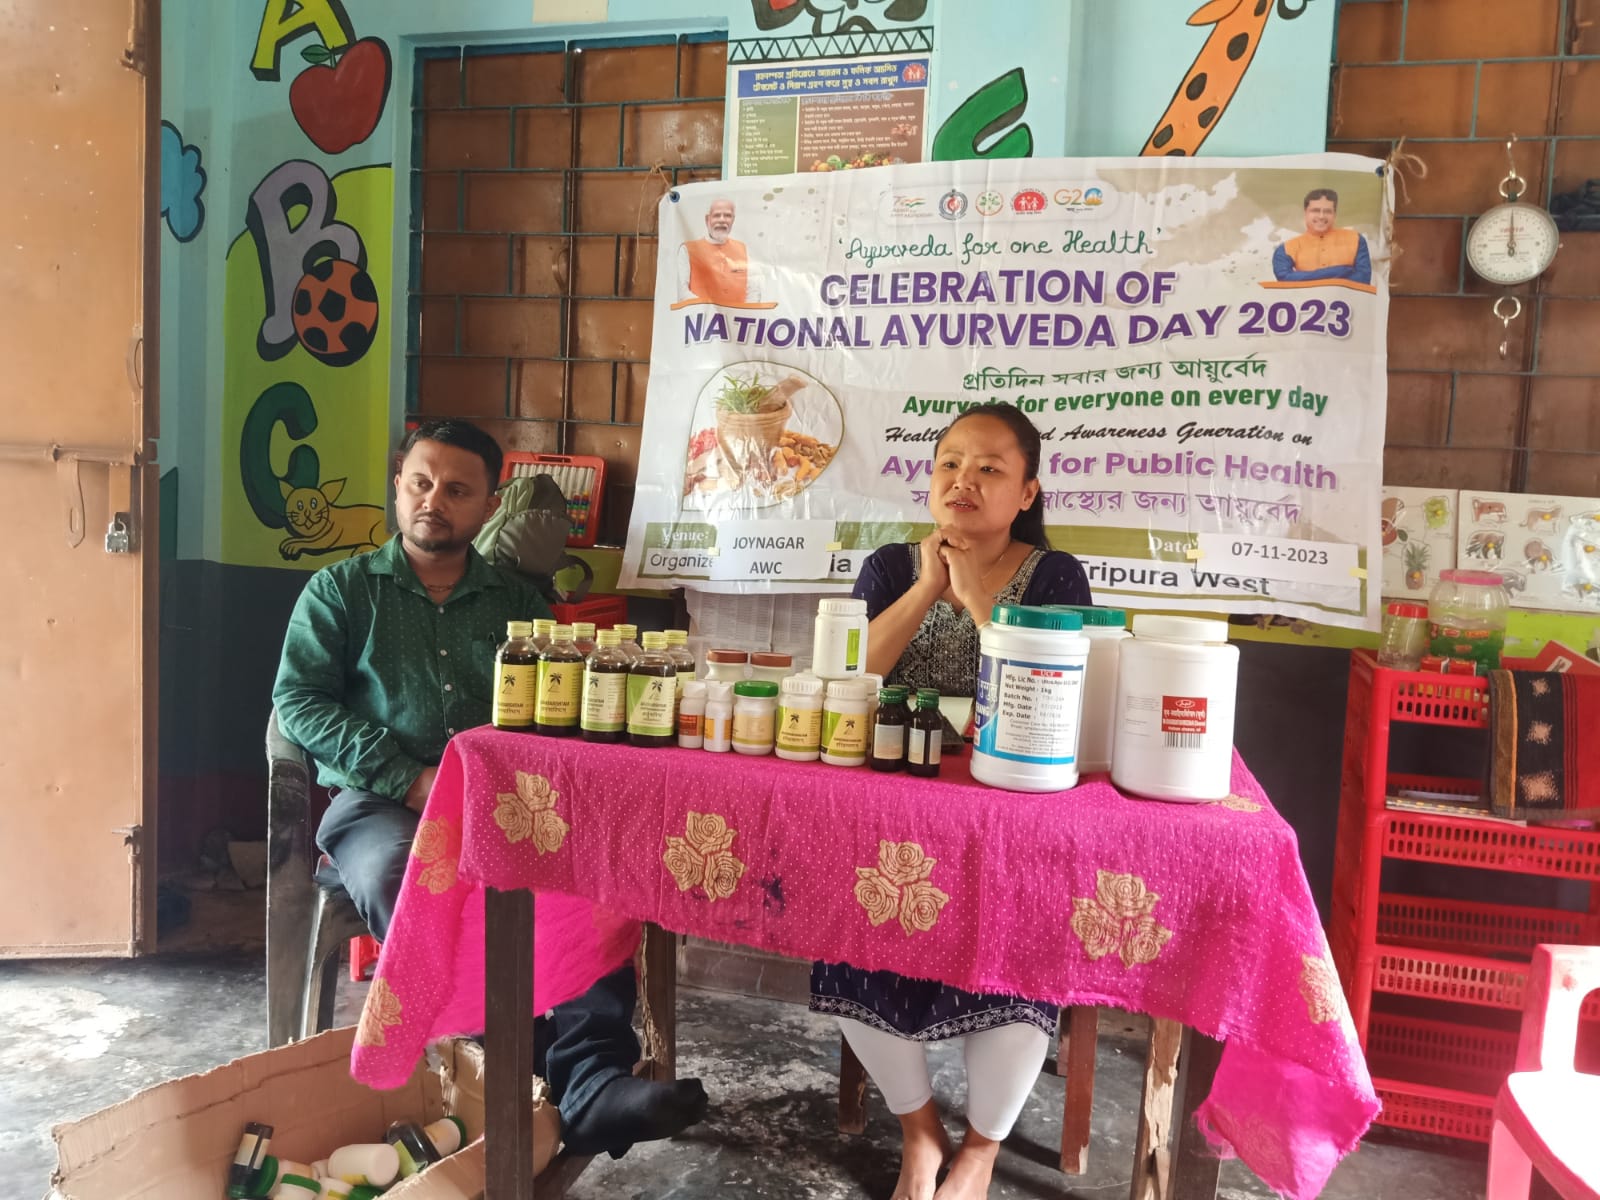 Awareness generation regarding Ayurveda system of lifestyle, oath taking & health camp for public